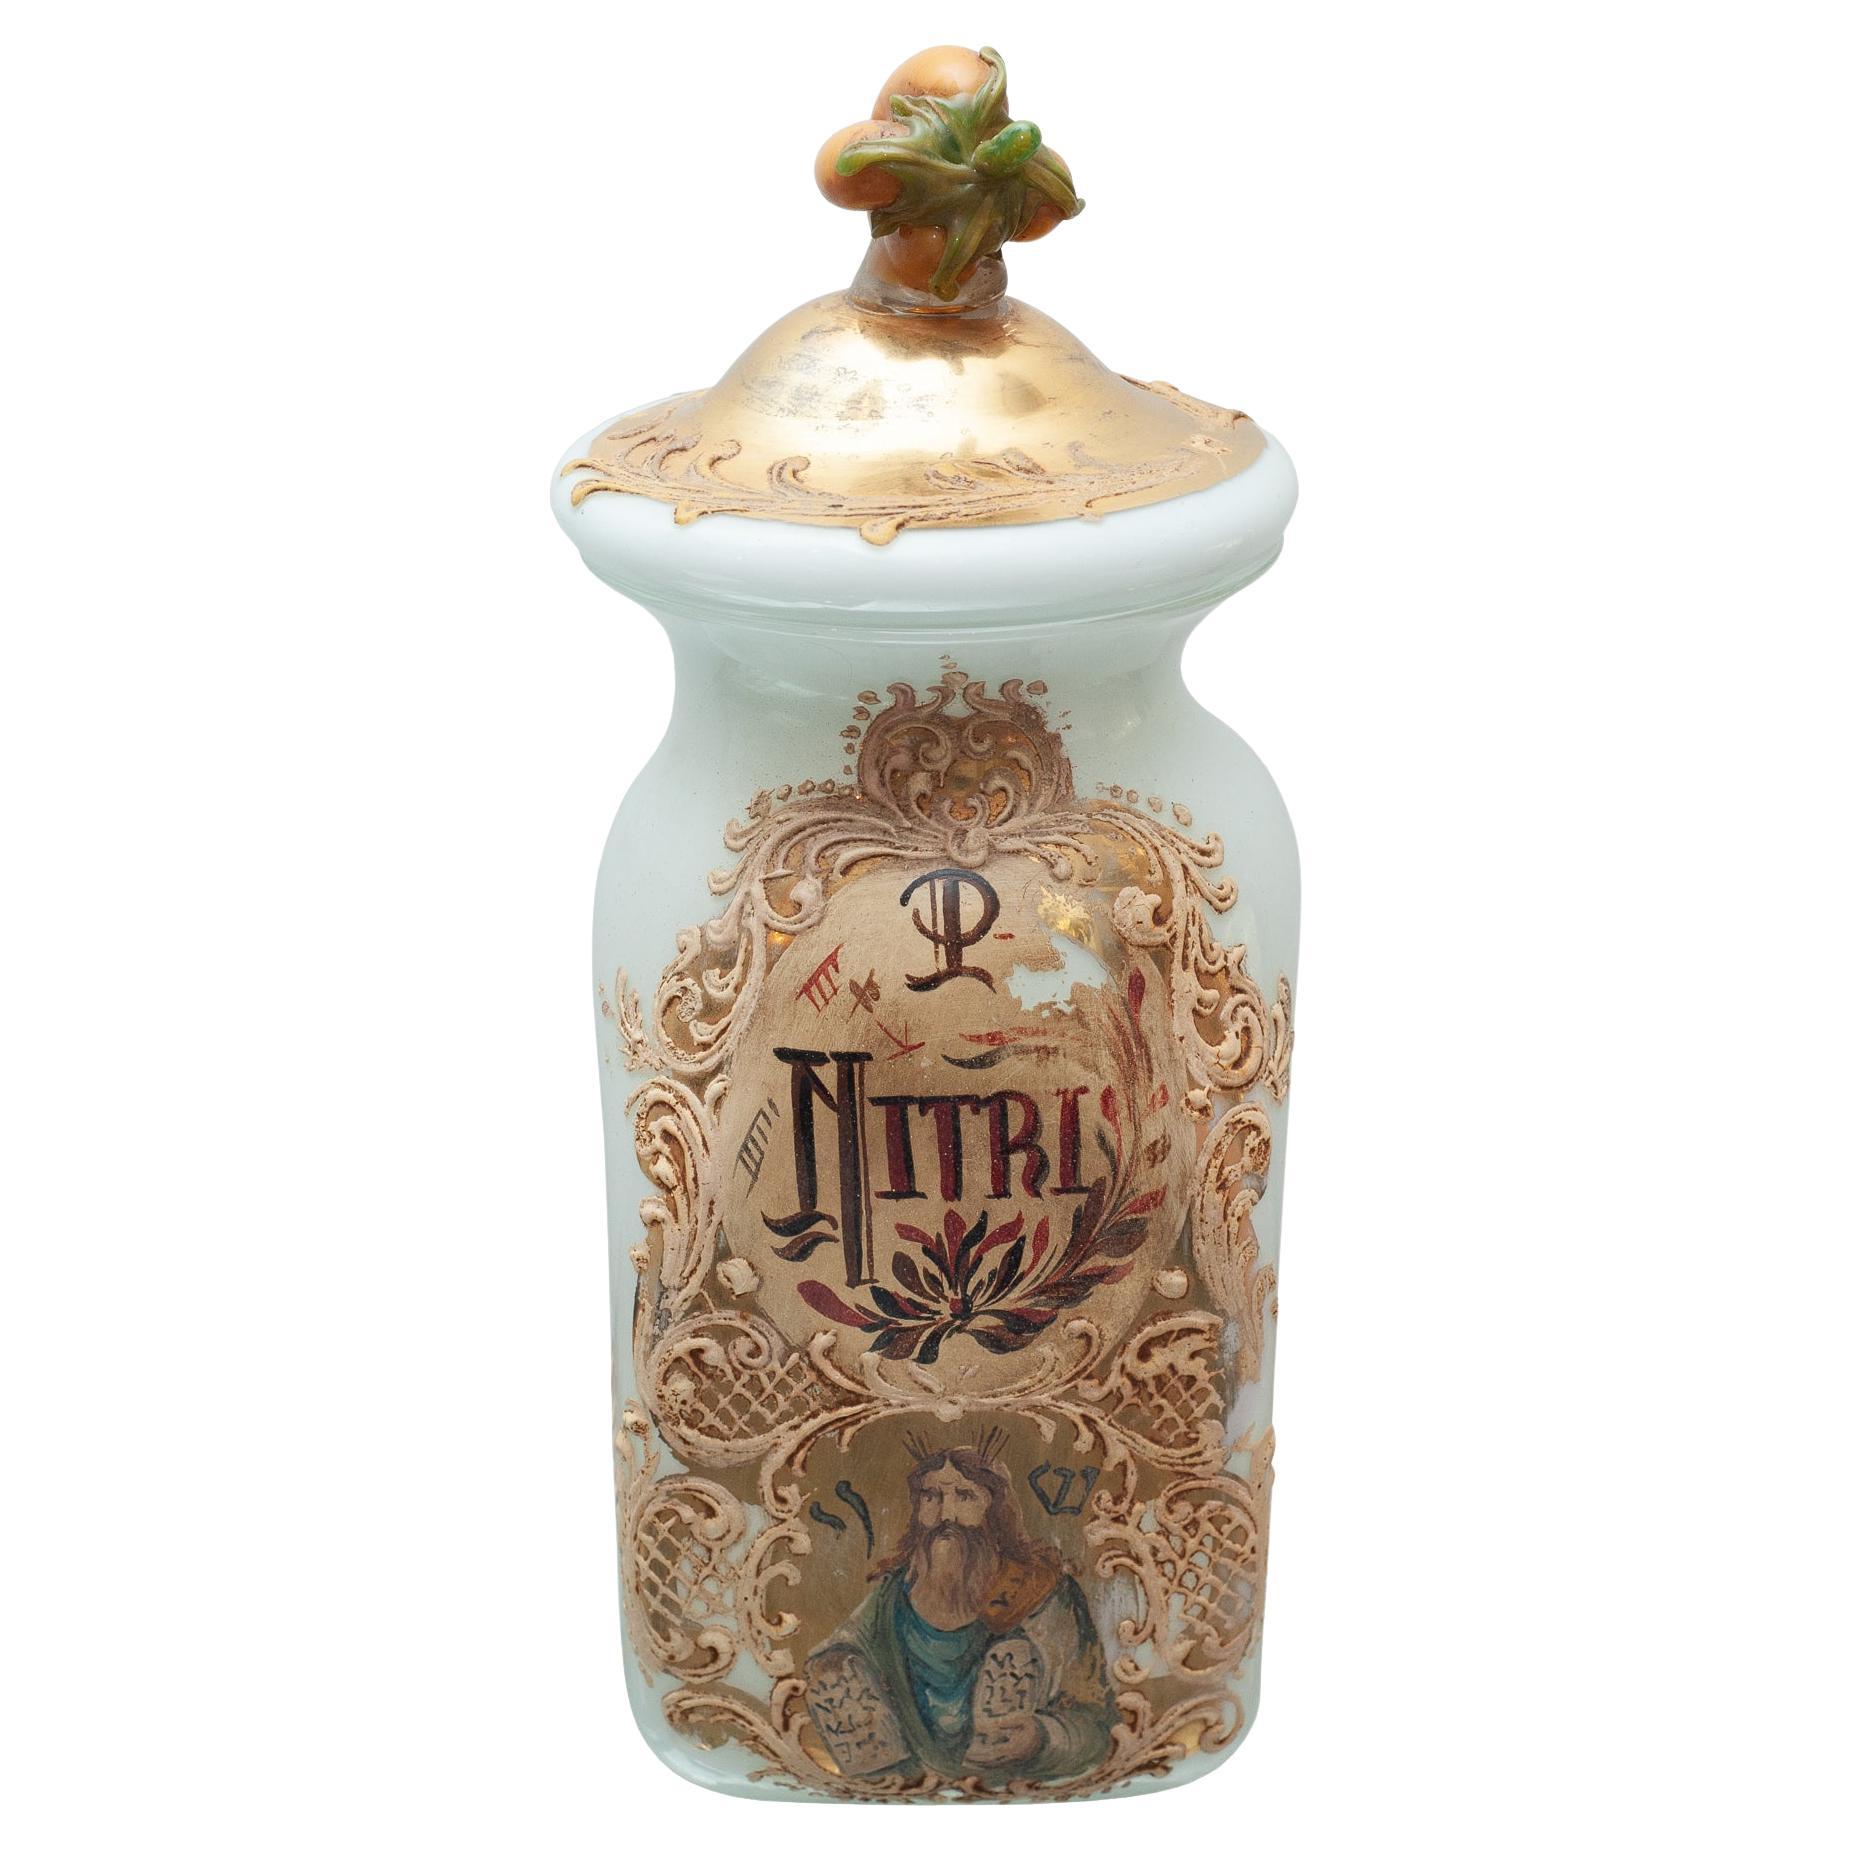 Antique Murano Glass Pharmacy / Apothecary Canister with Elaborate Handpainting